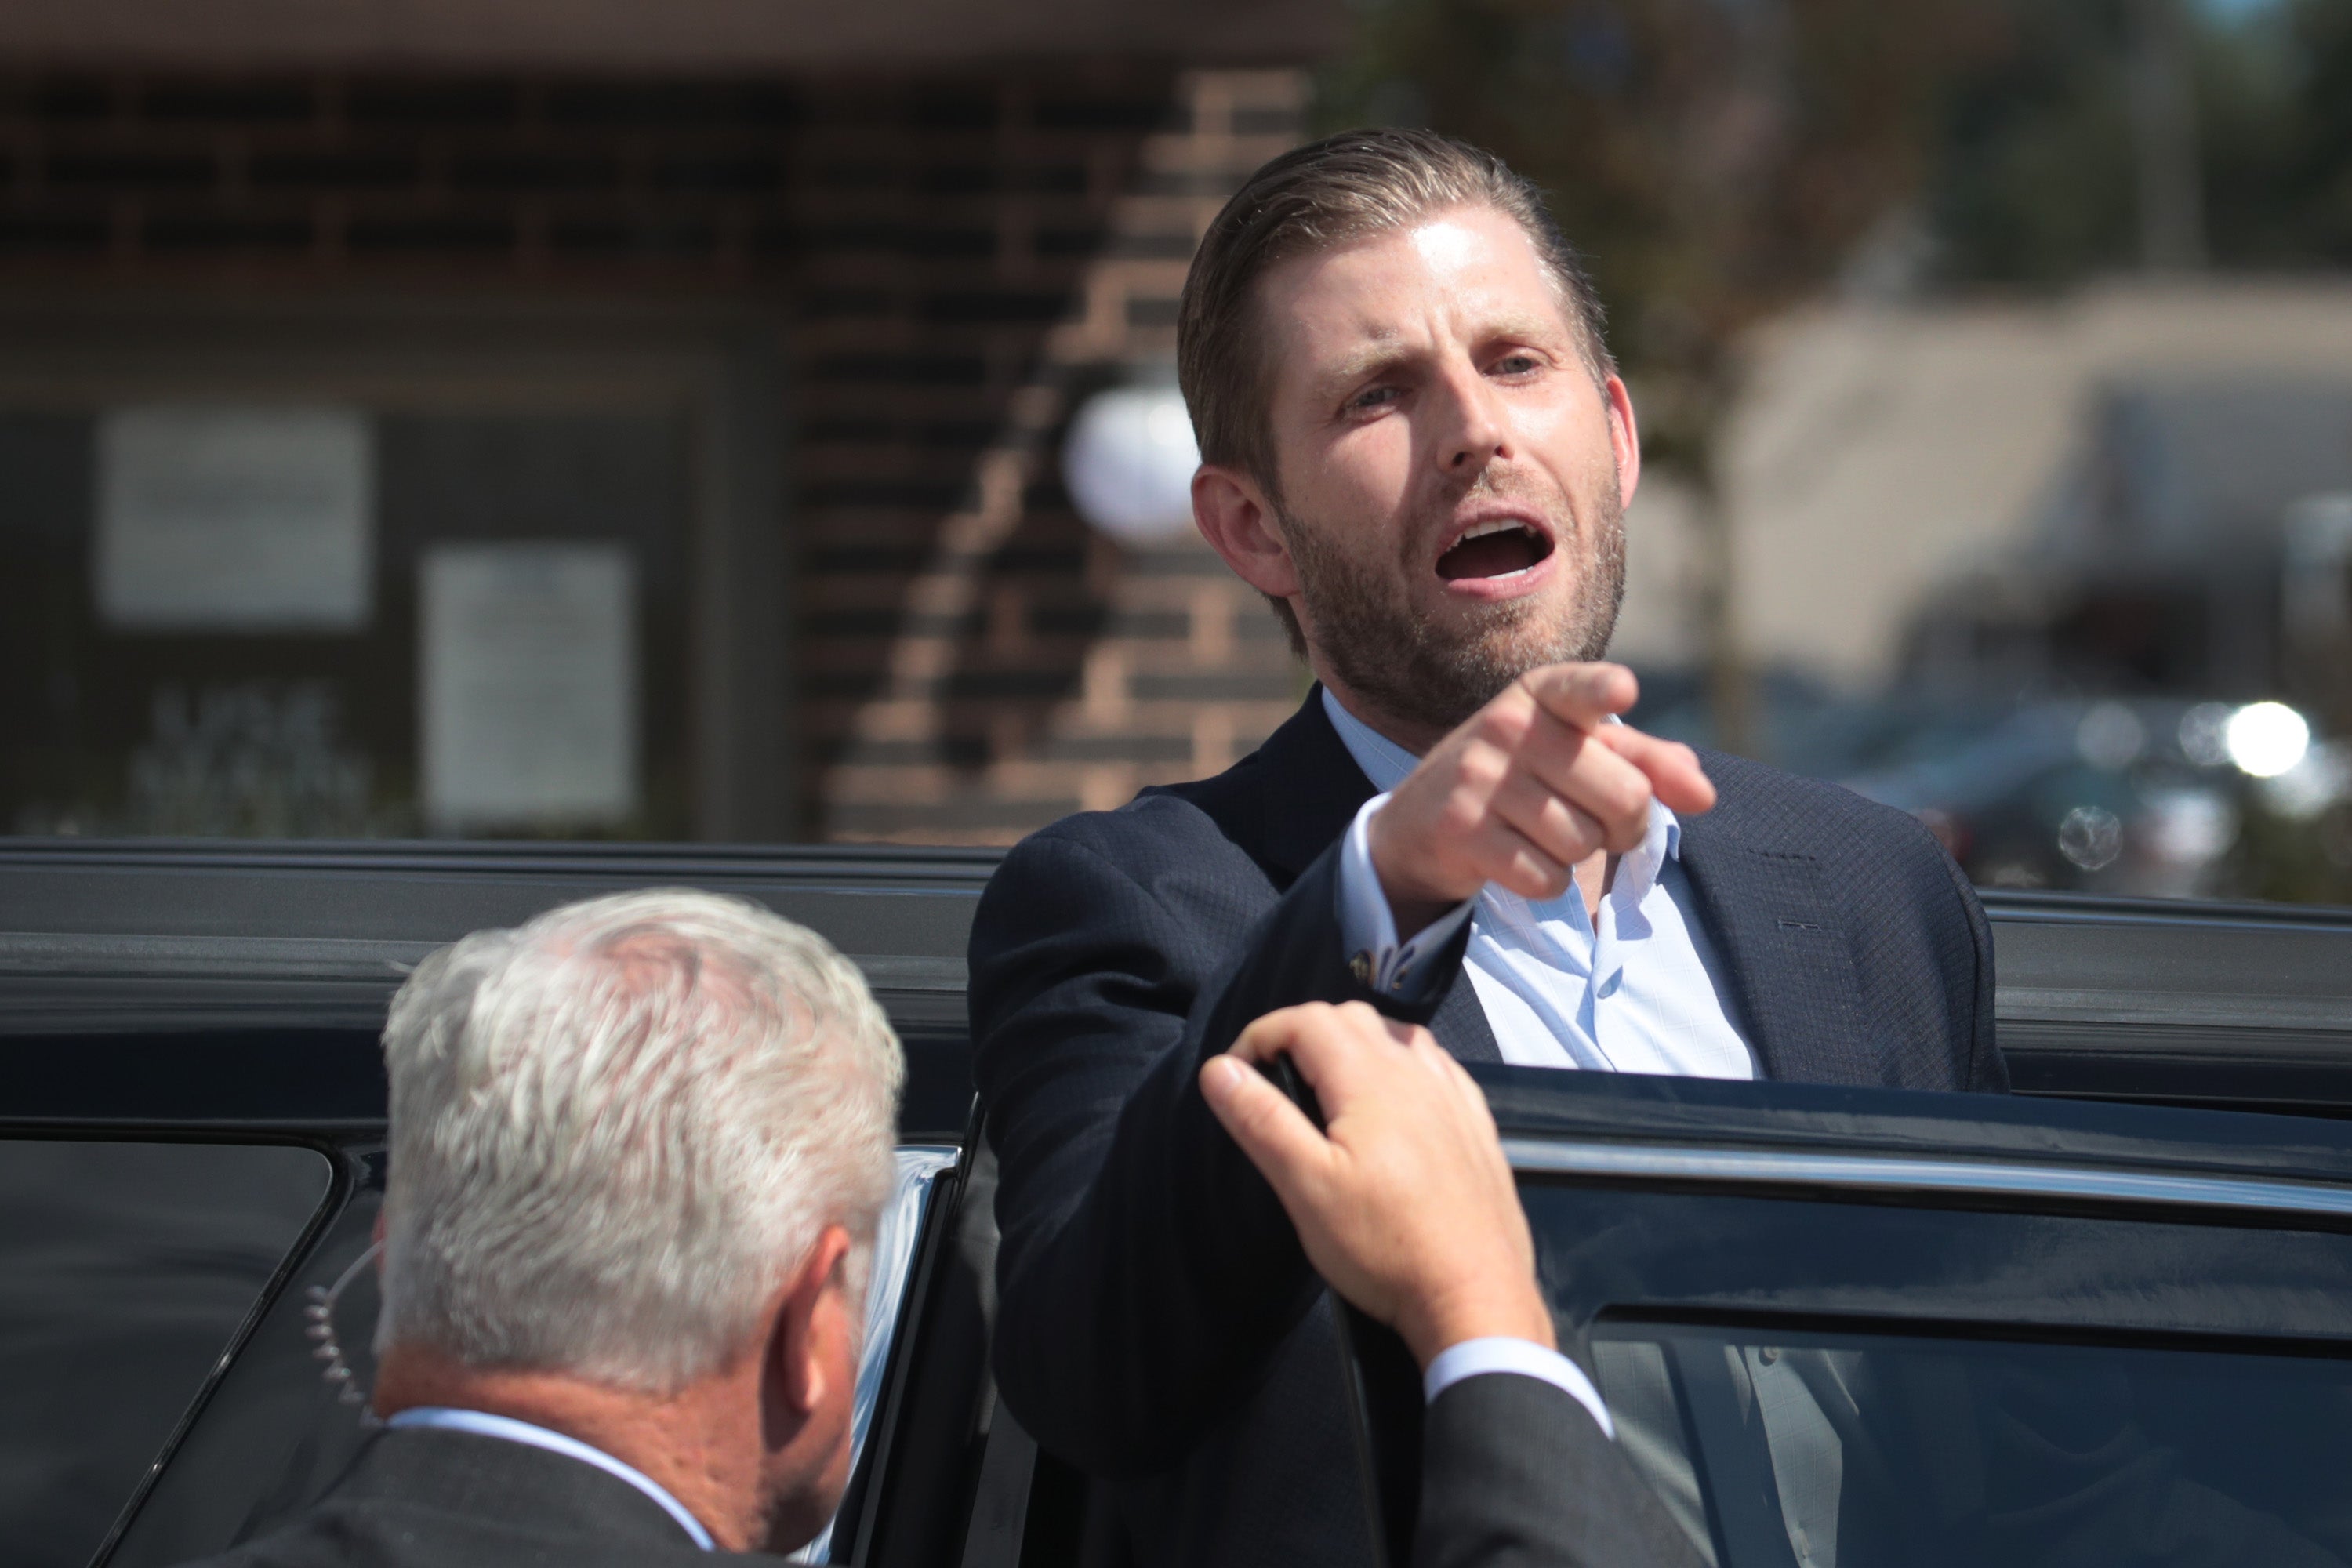 Eric Trump, the son of ex-president Donald Trump reportedly screamed at campaign aides, according to a new book by two Pulitzer Prize winning journalists